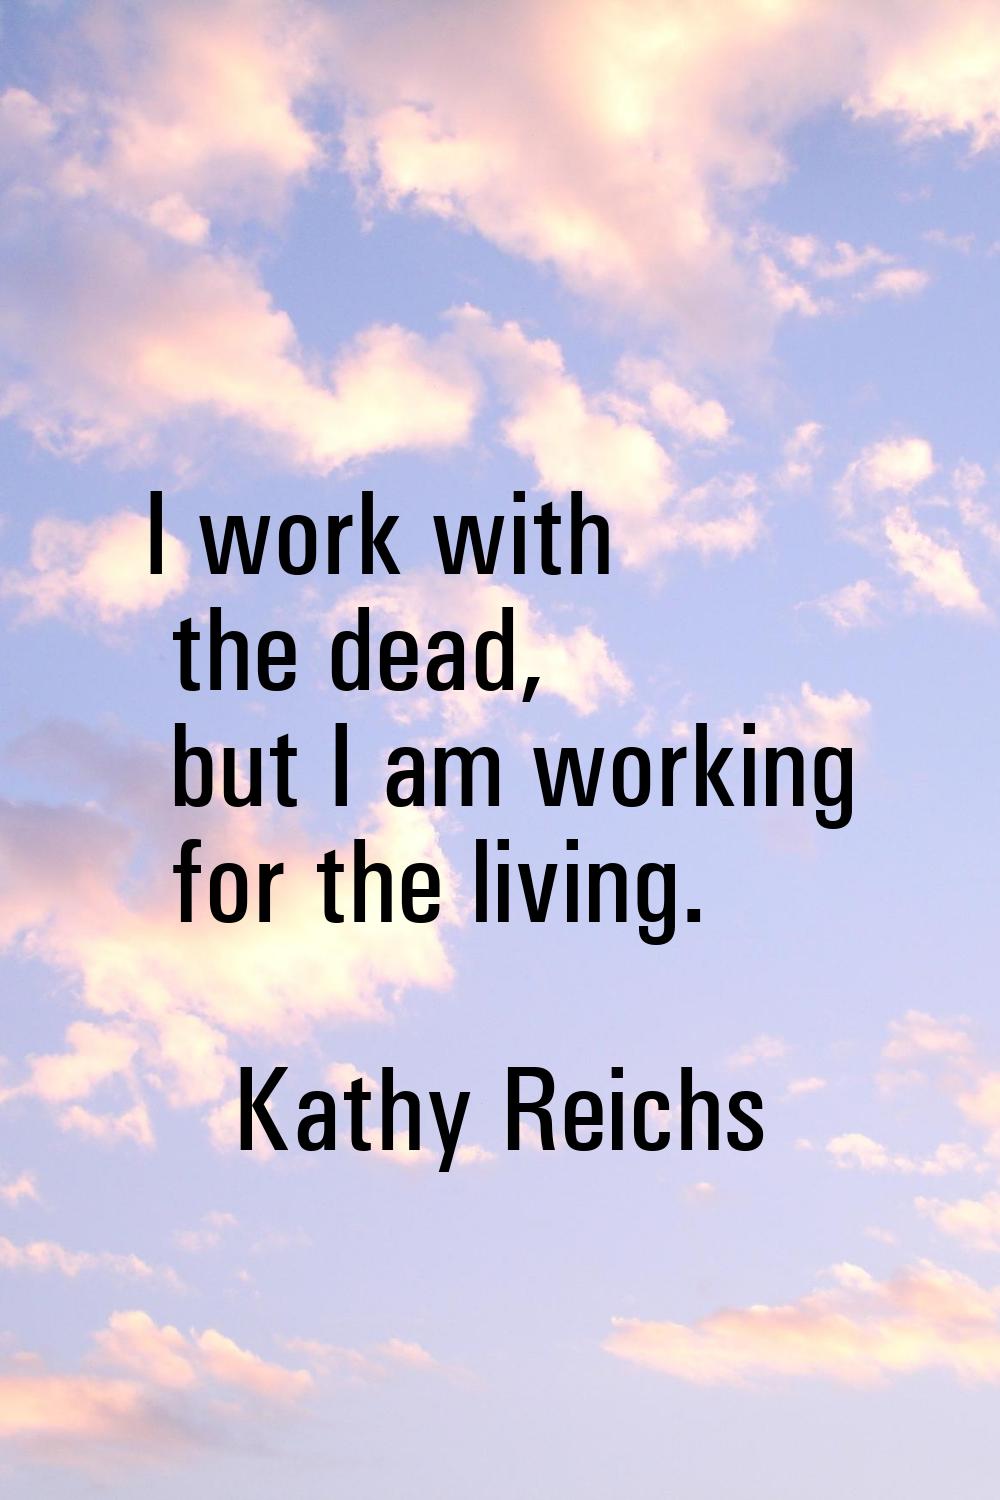 I work with the dead, but I am working for the living.